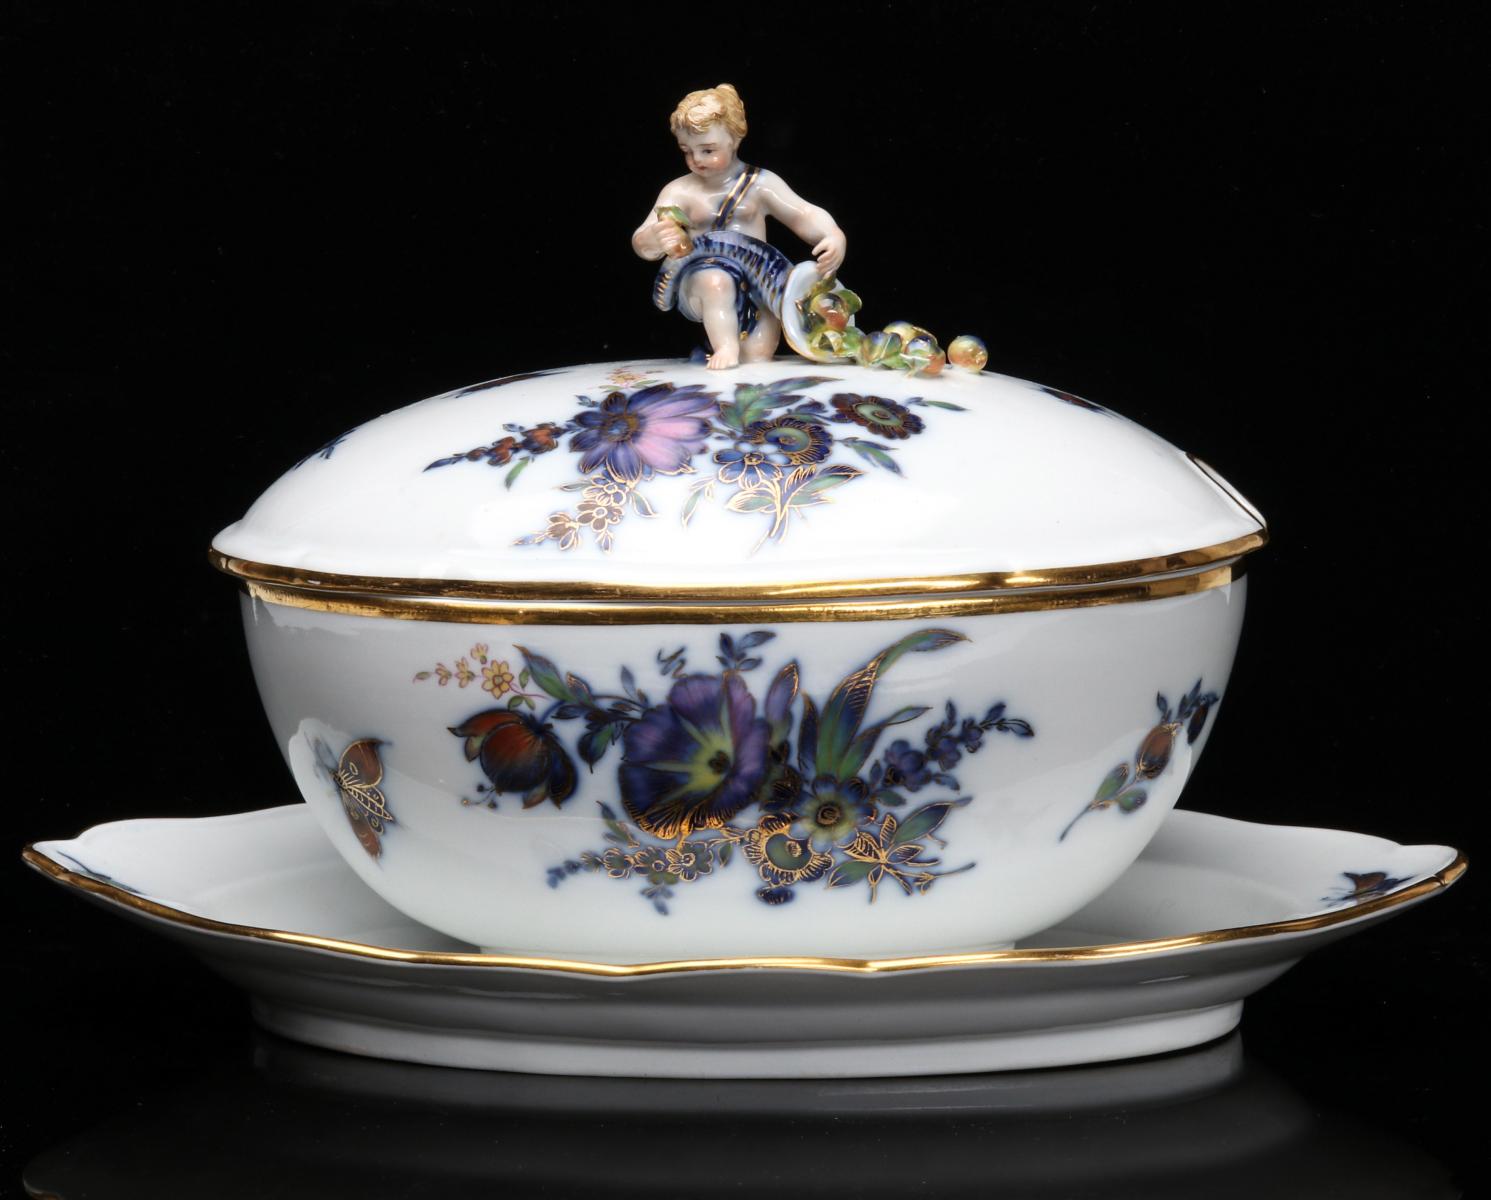 A MEISSEN PORCELAIN COVERED SAUCE DISH WITH FIGURE